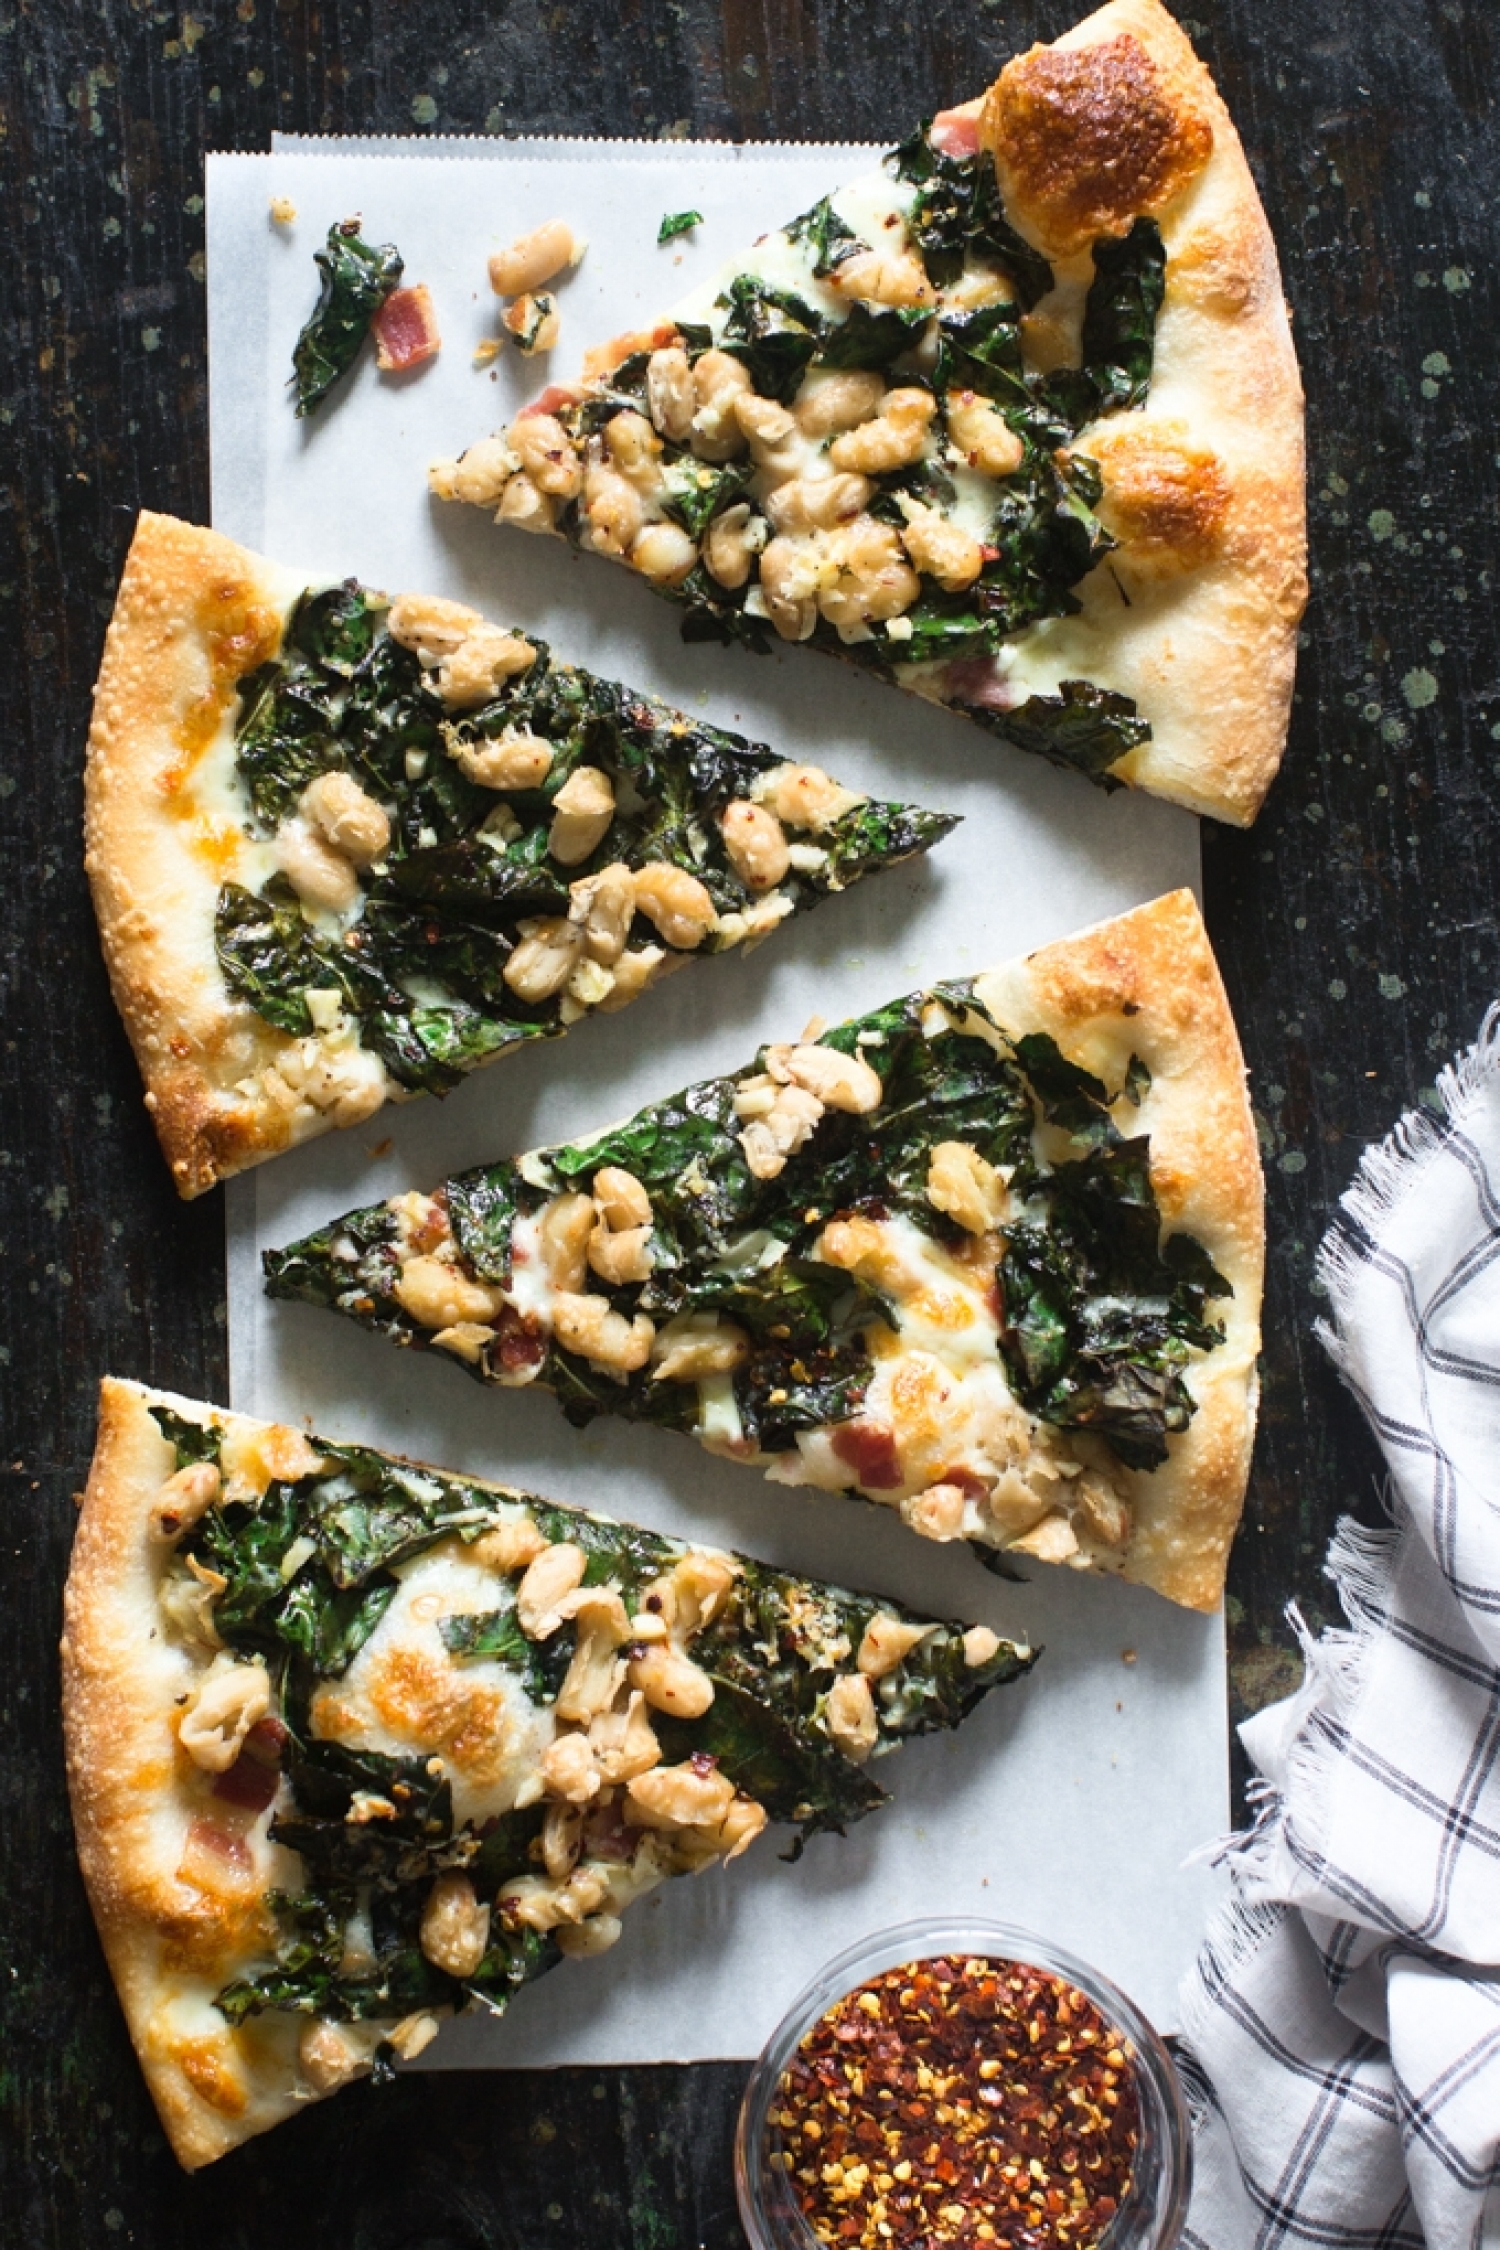 <p>Here's another way to put beans on pizza that makes a whole lot of yummy sense. Kale and white beans are already a winning duo, and in <a href="https://www.kitchenkonfidence.com/2017/01/kale-white-bean-pizza-recipe" rel="noopener">this recipe</a> they come together with garlic, lemon juice, bacon and plenty of cheese for the ultimate healthy-yet-satisfying meal.</p>